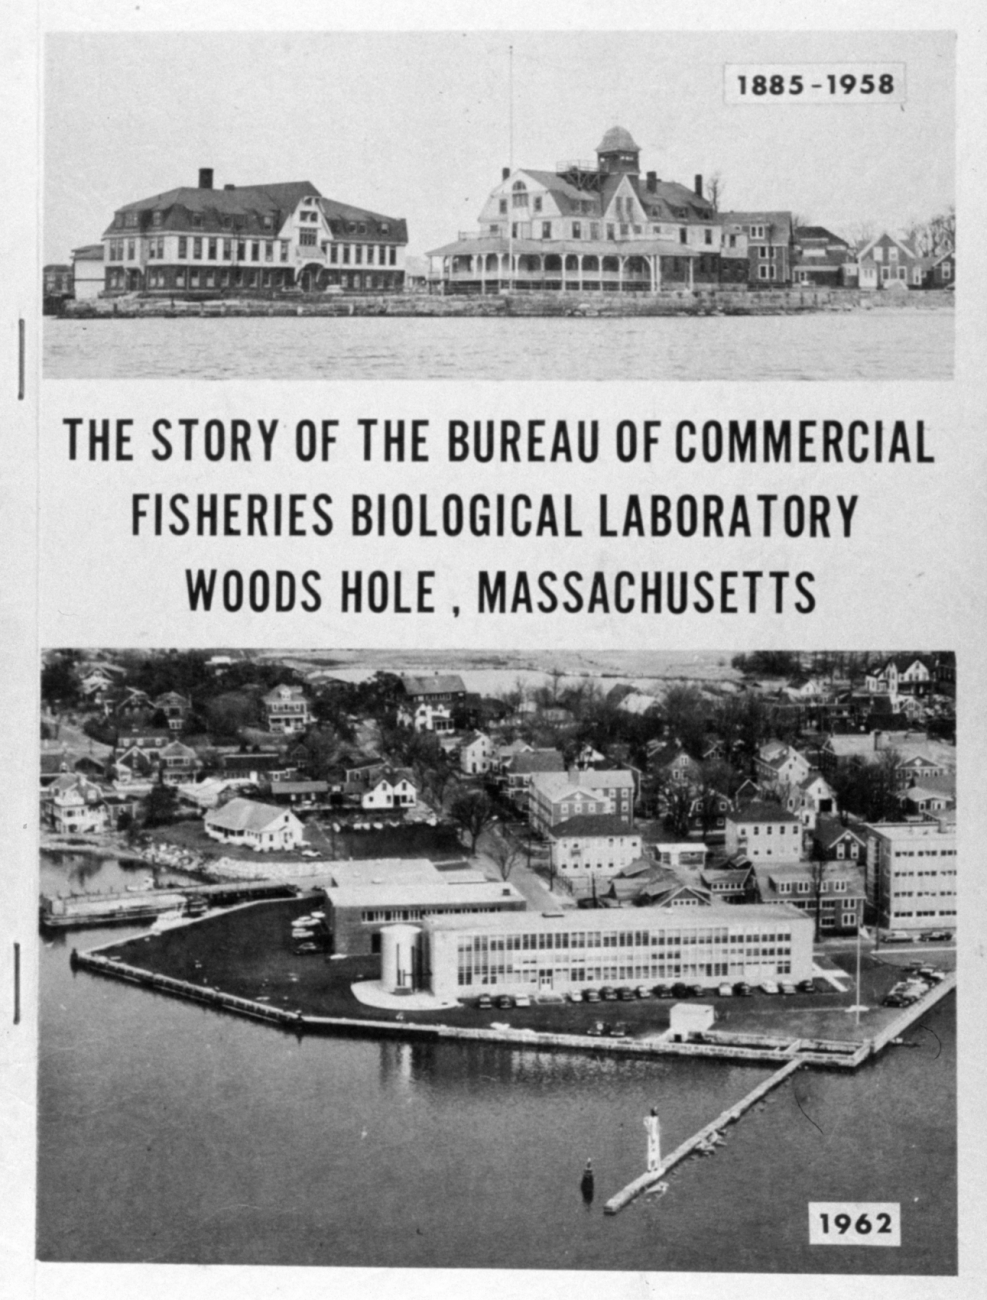 Cover of The Story of the Bureau of Commercial Fisheries BiologicalLaboratory Woods Hole, Massachusetts published in 1962